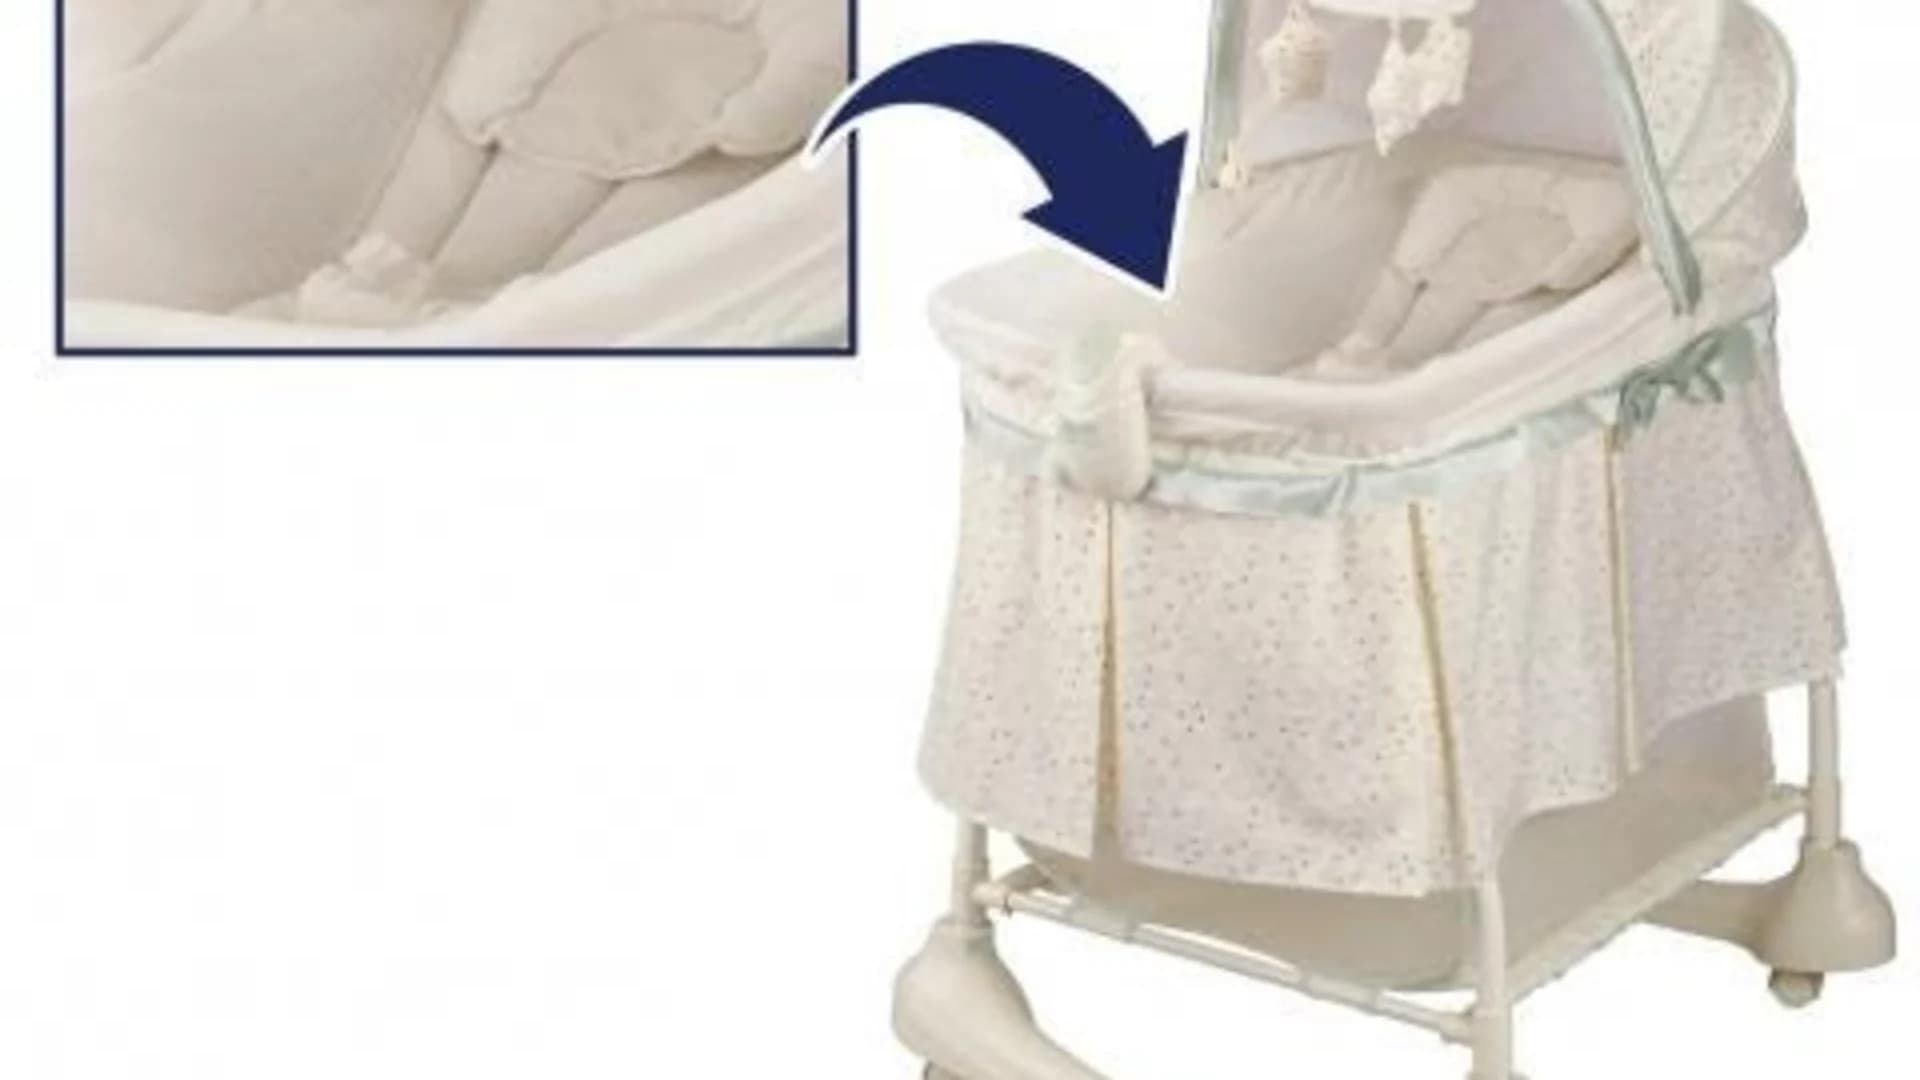 Company recalls 51,000 inclined sleeper accessories for safety reasons